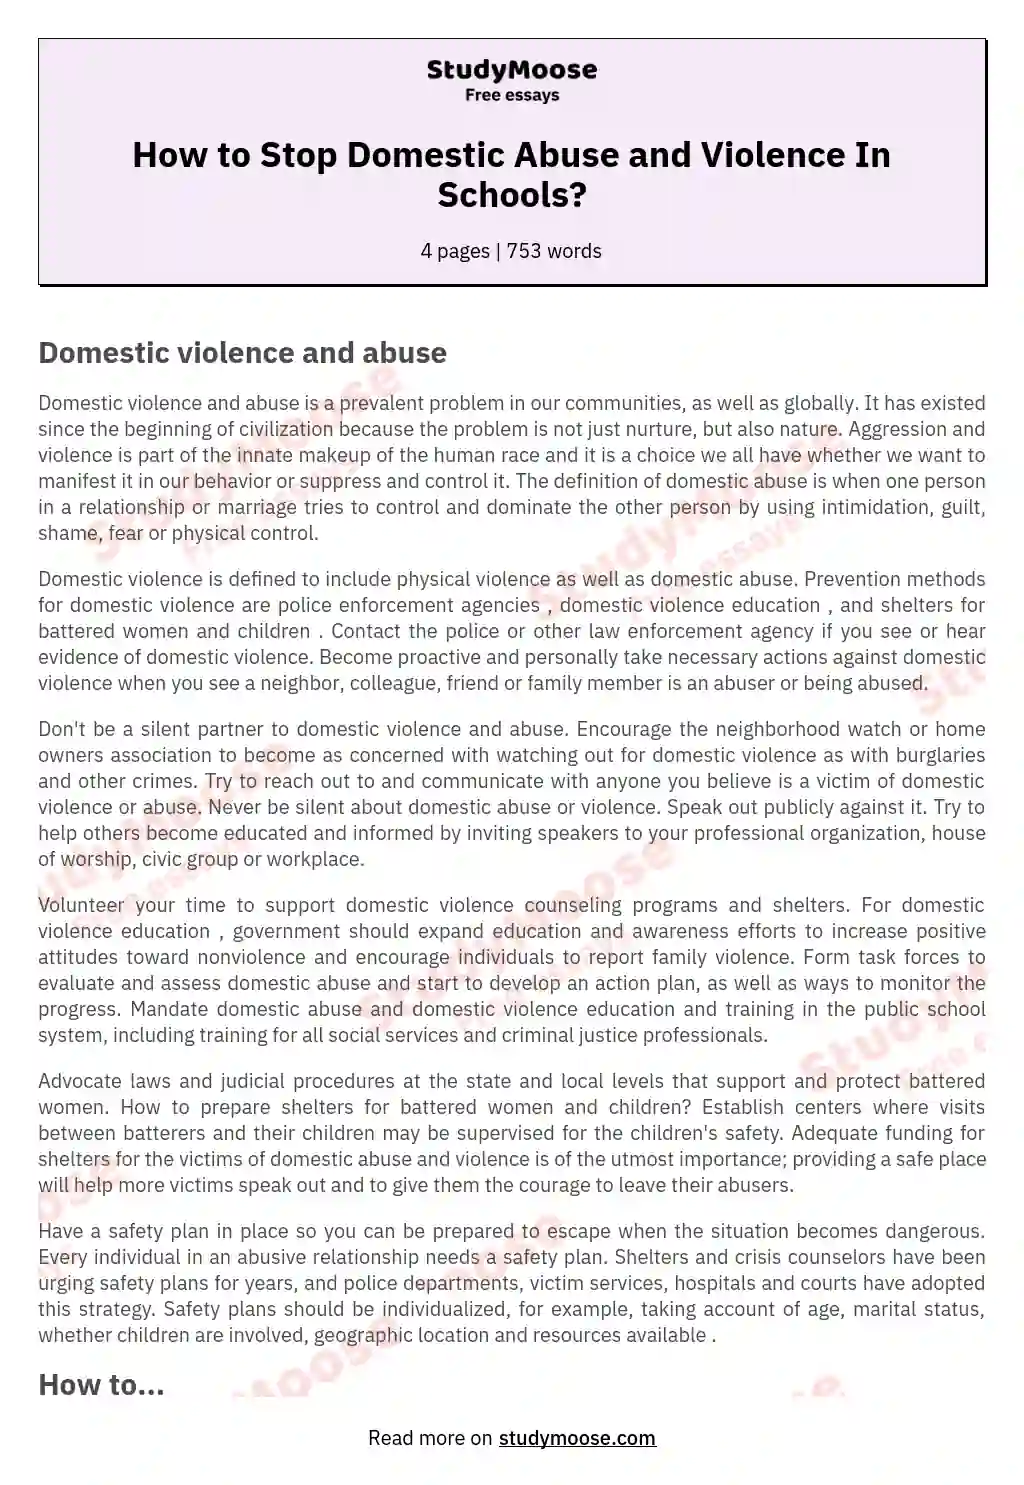 How to Stop Domestic Abuse and Violence In Schools? essay